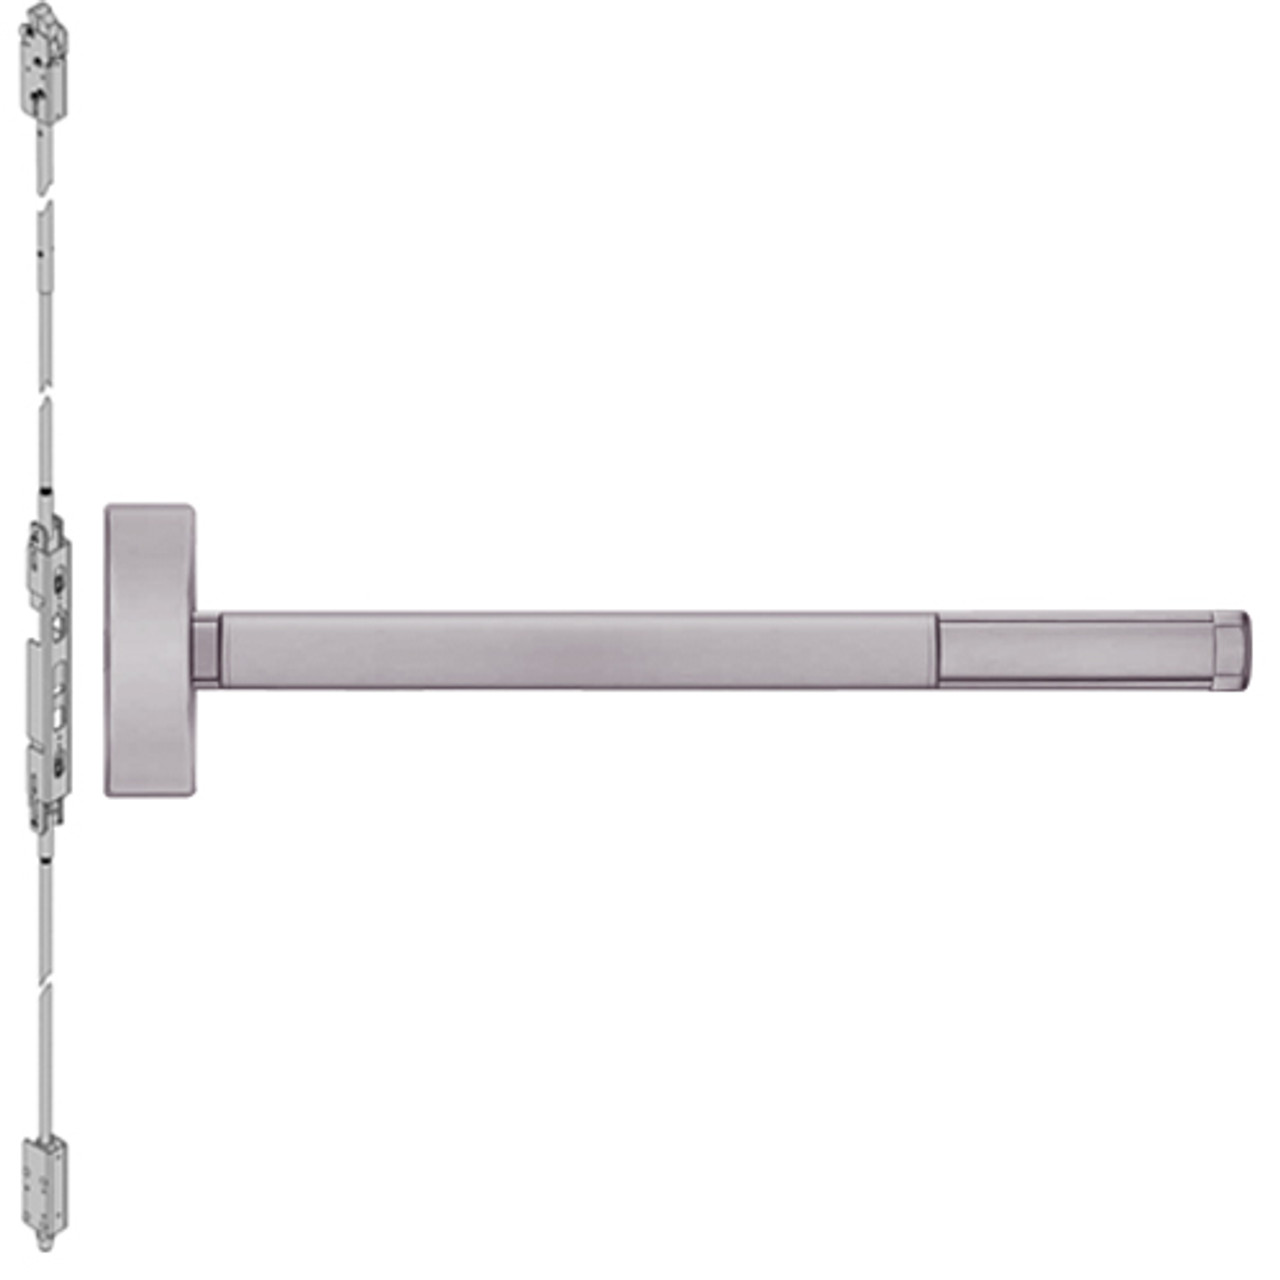 ELR2802-630-48 PHI 2800 Series Concealed Vertical Rod Exit Device with Electric Latch Retraction Prepped for Dummy Trim in Satin Stainless Steel Finish